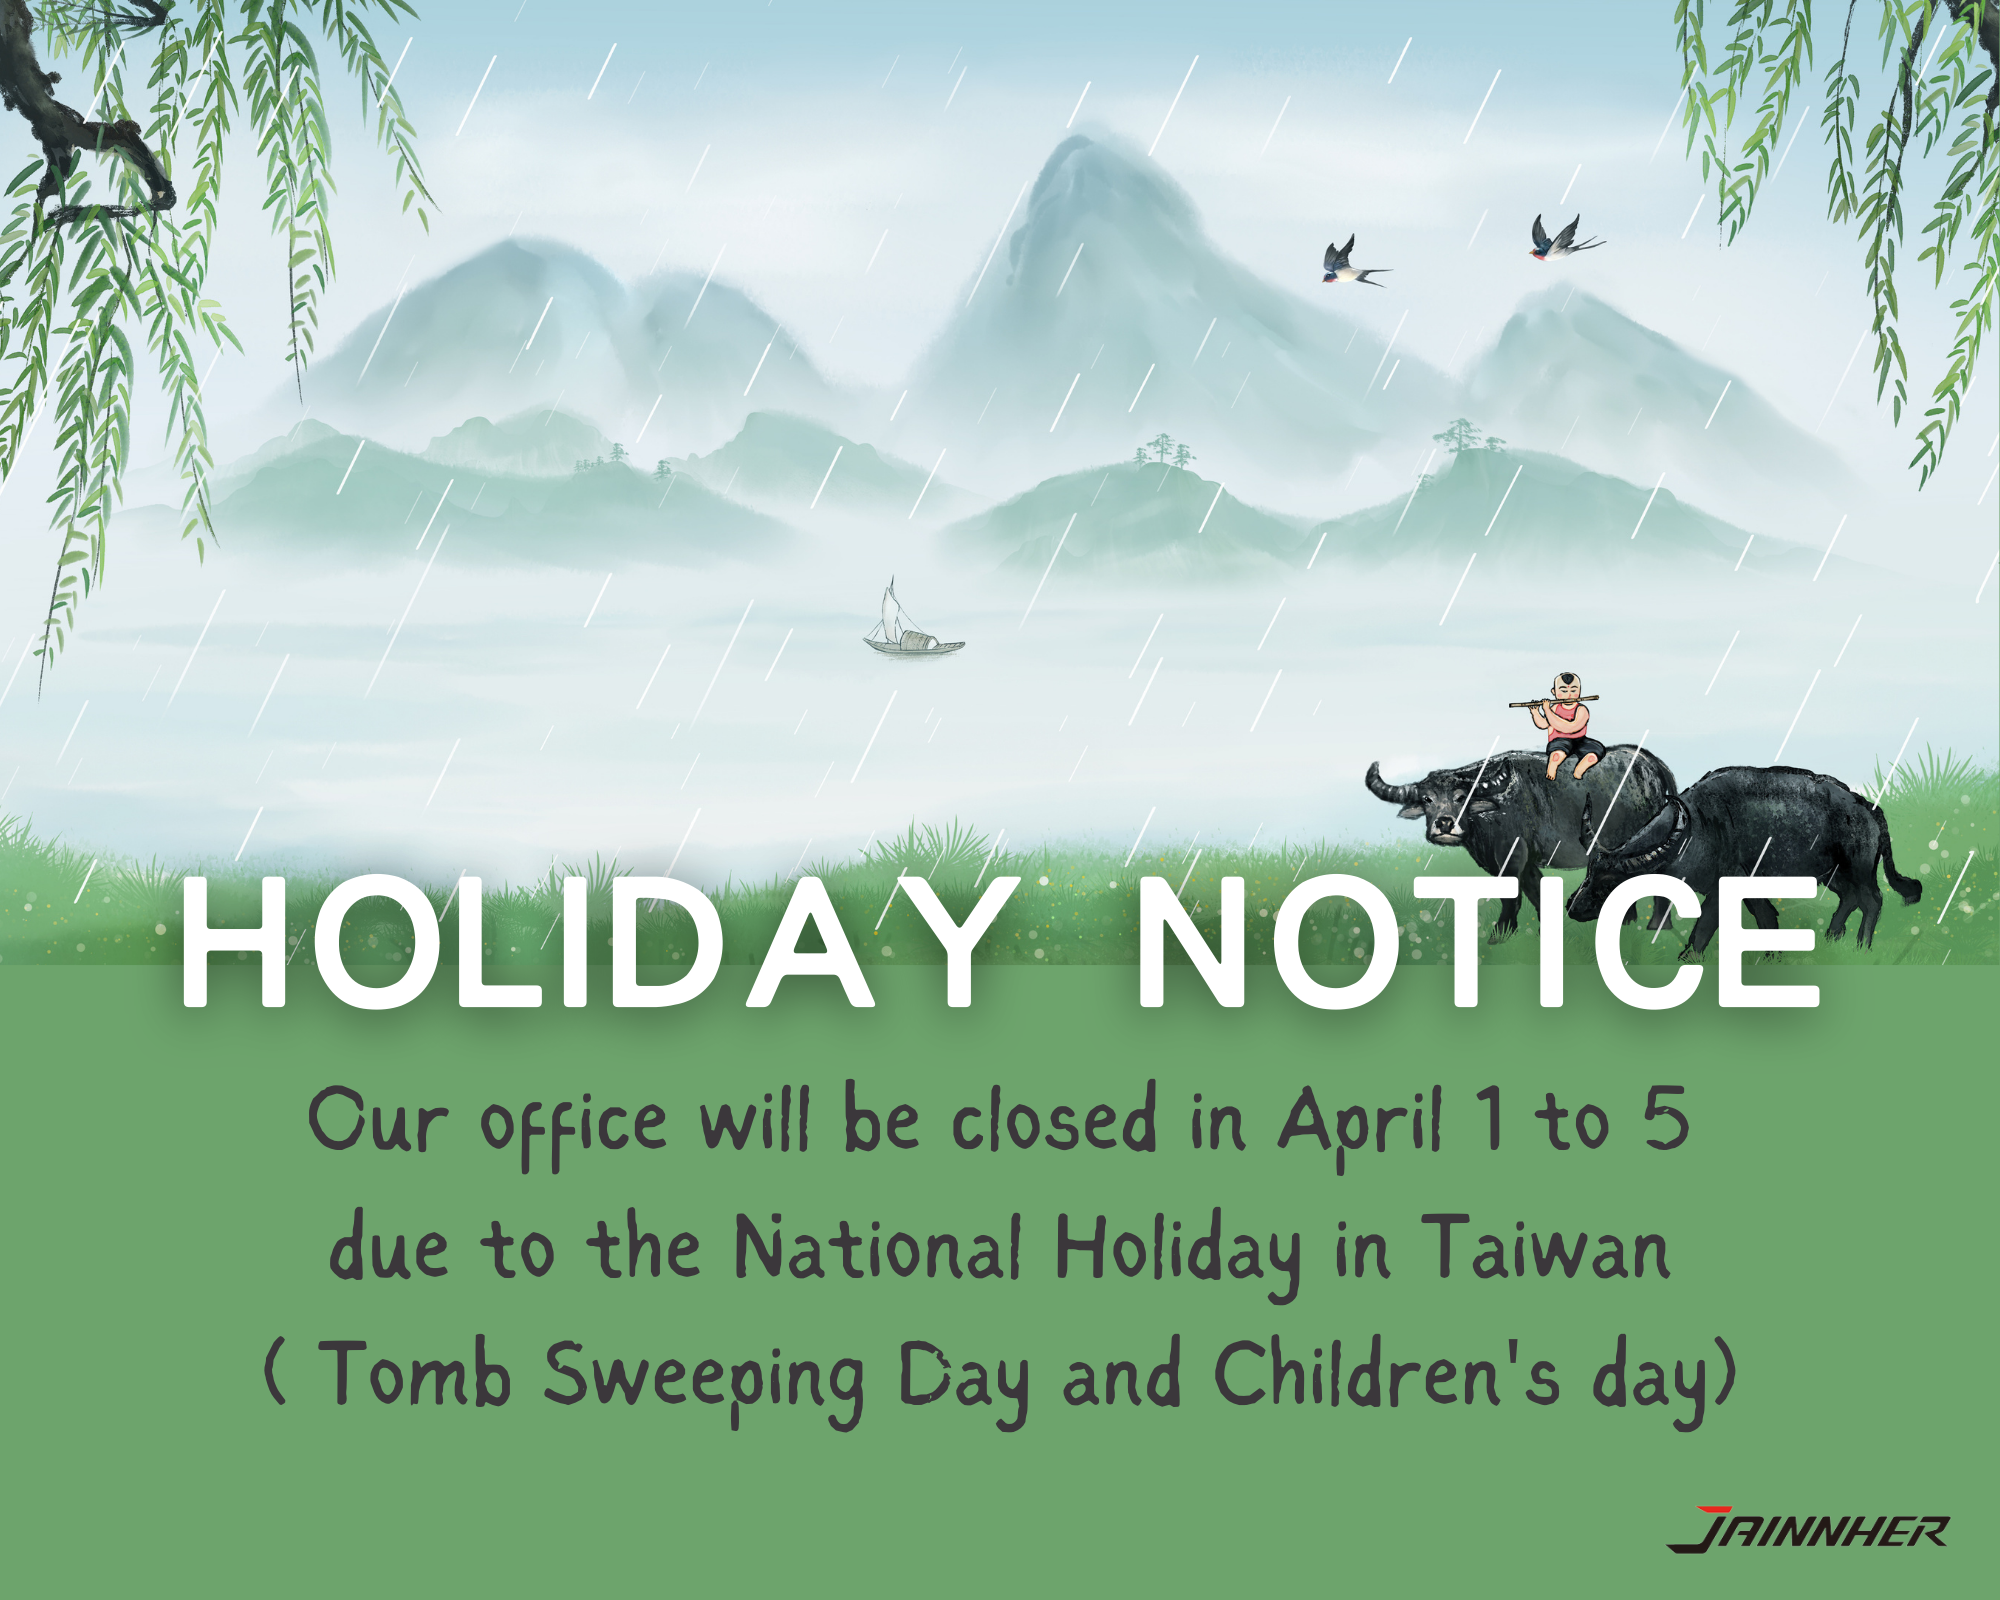 2023 Tomb Sweeping Day & Children's Day Holiday Notice